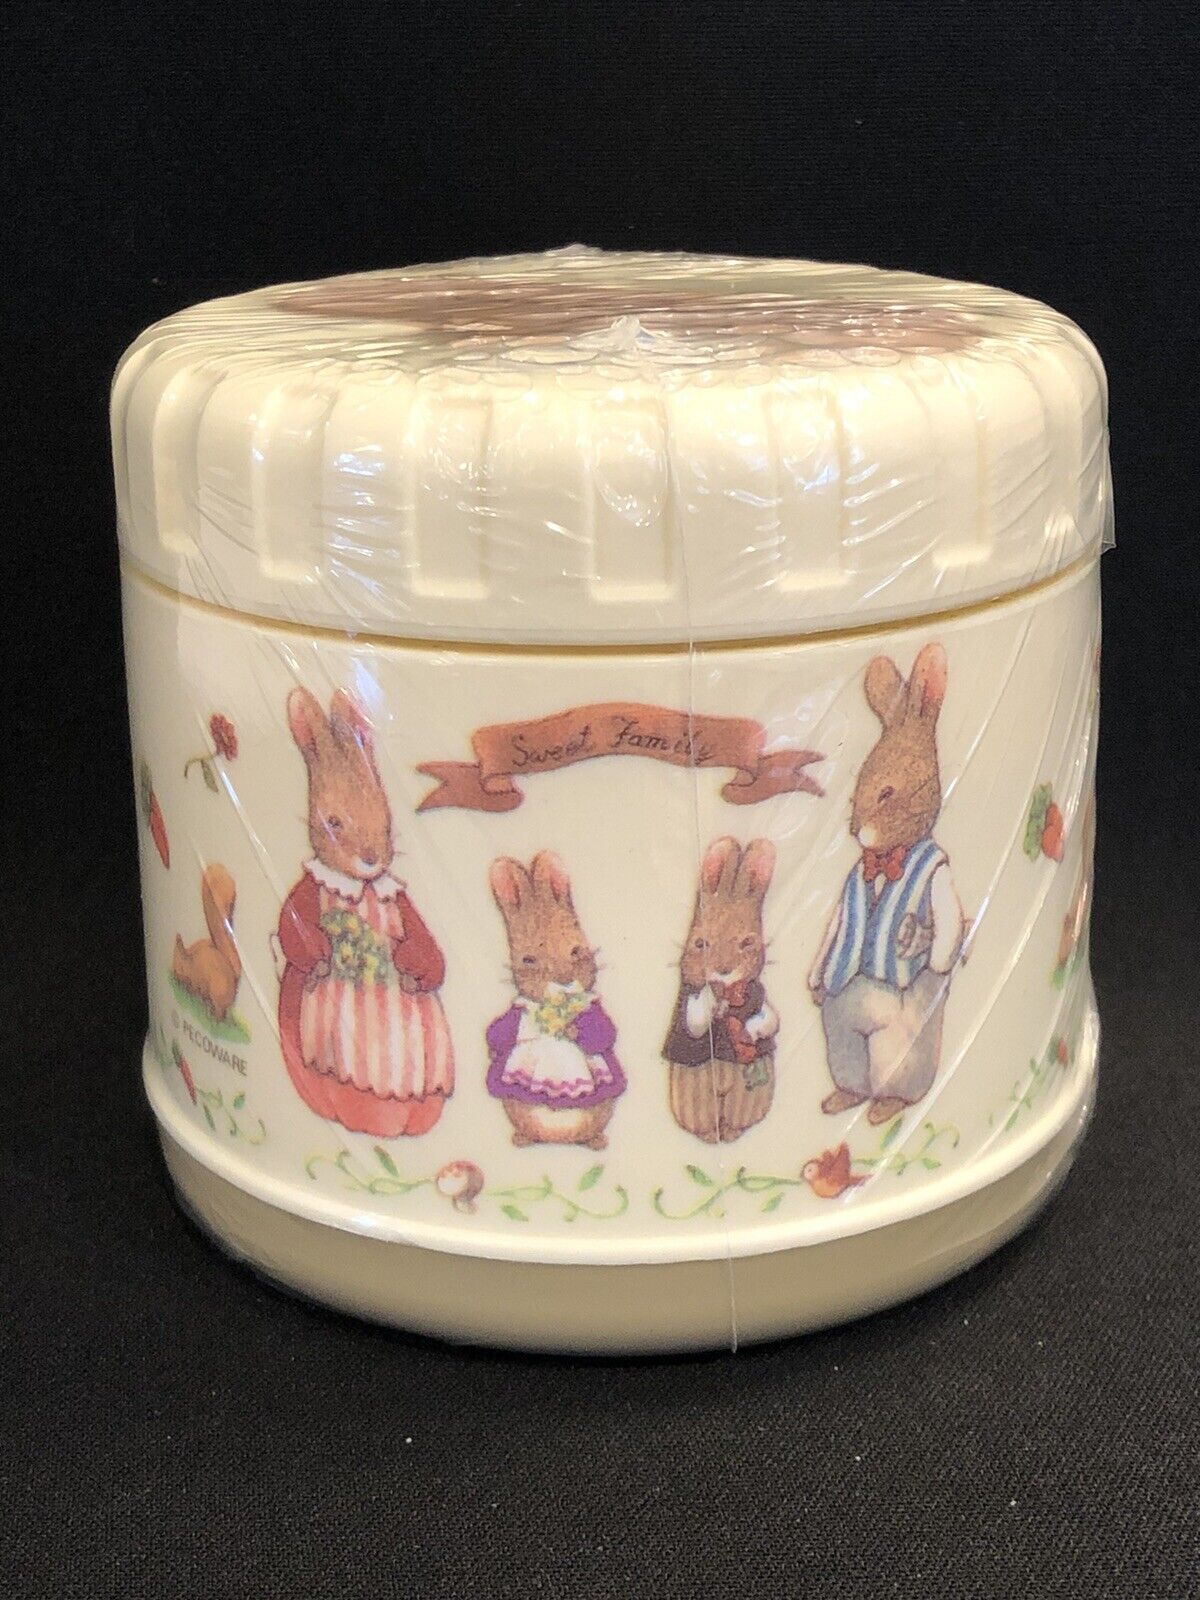 NEW Vintage Pecoware Sweet Family Rabbits Thermos Folding Spoon Bento Lunch Box